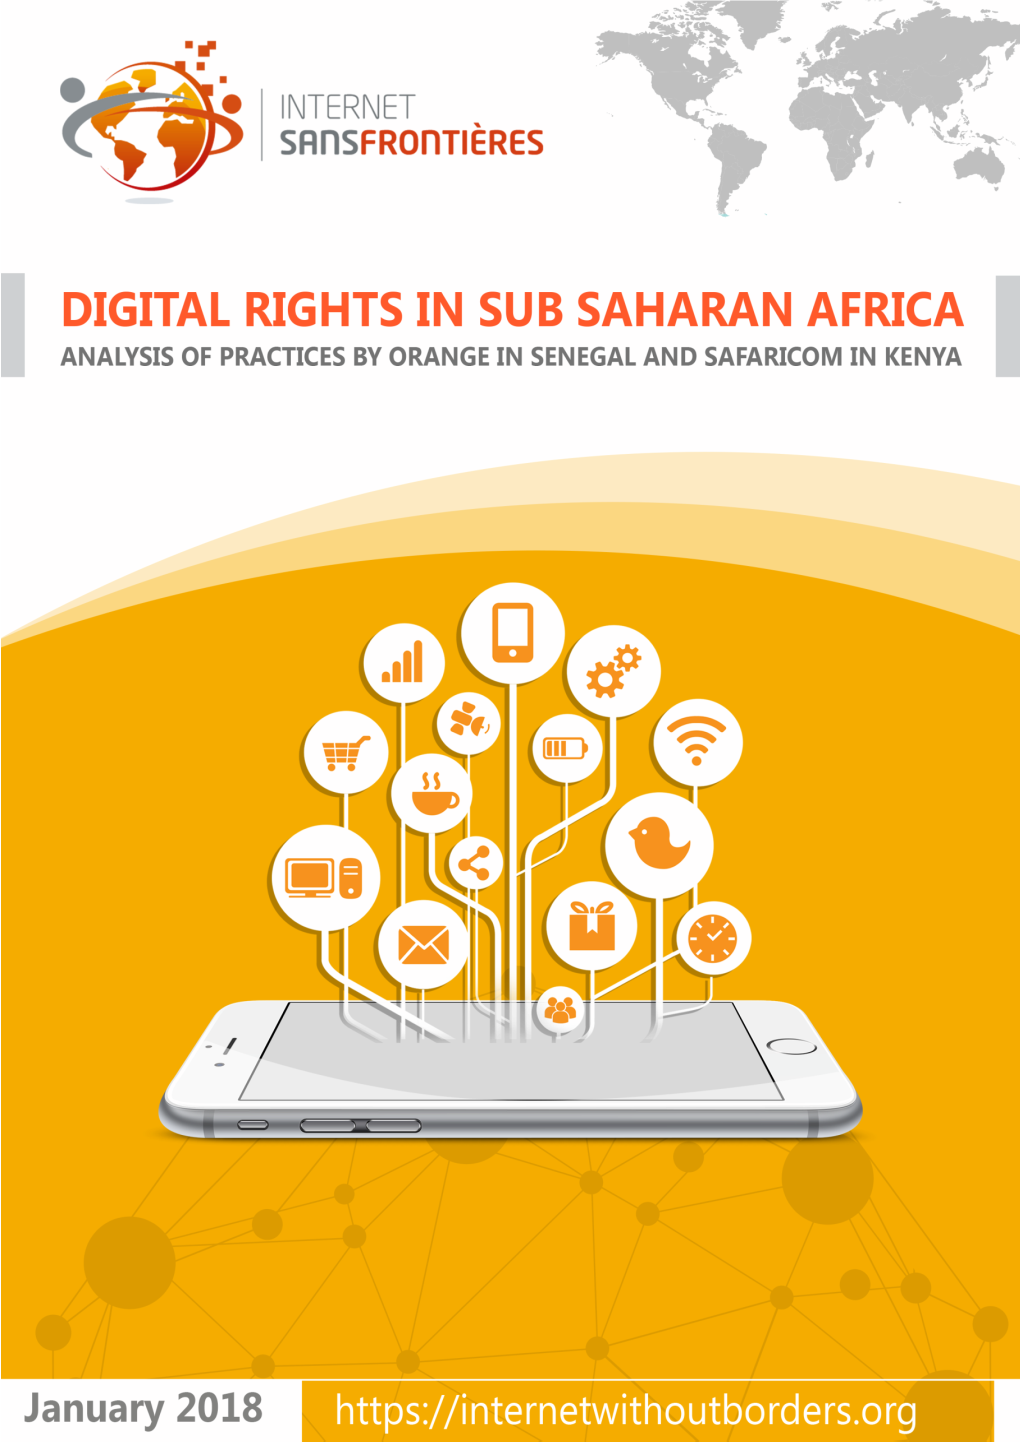 Africa: Analysis of the Practices of Orange in Senegal and Safaricom in Kenya